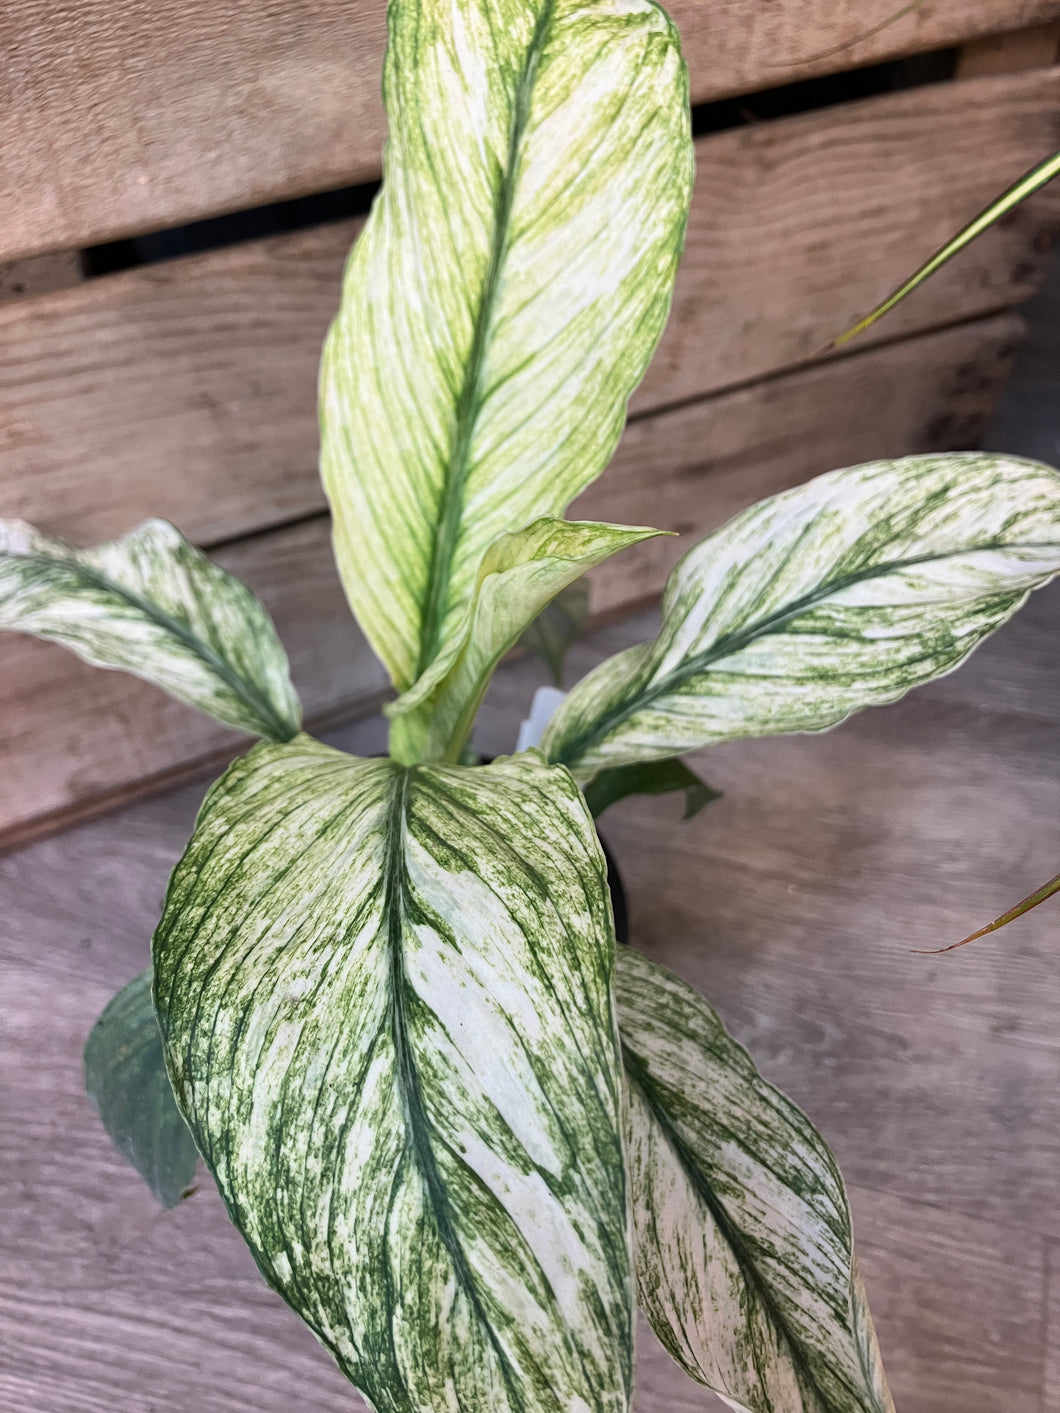 Spathiphyllum 'Jessica' (Peace Lily)